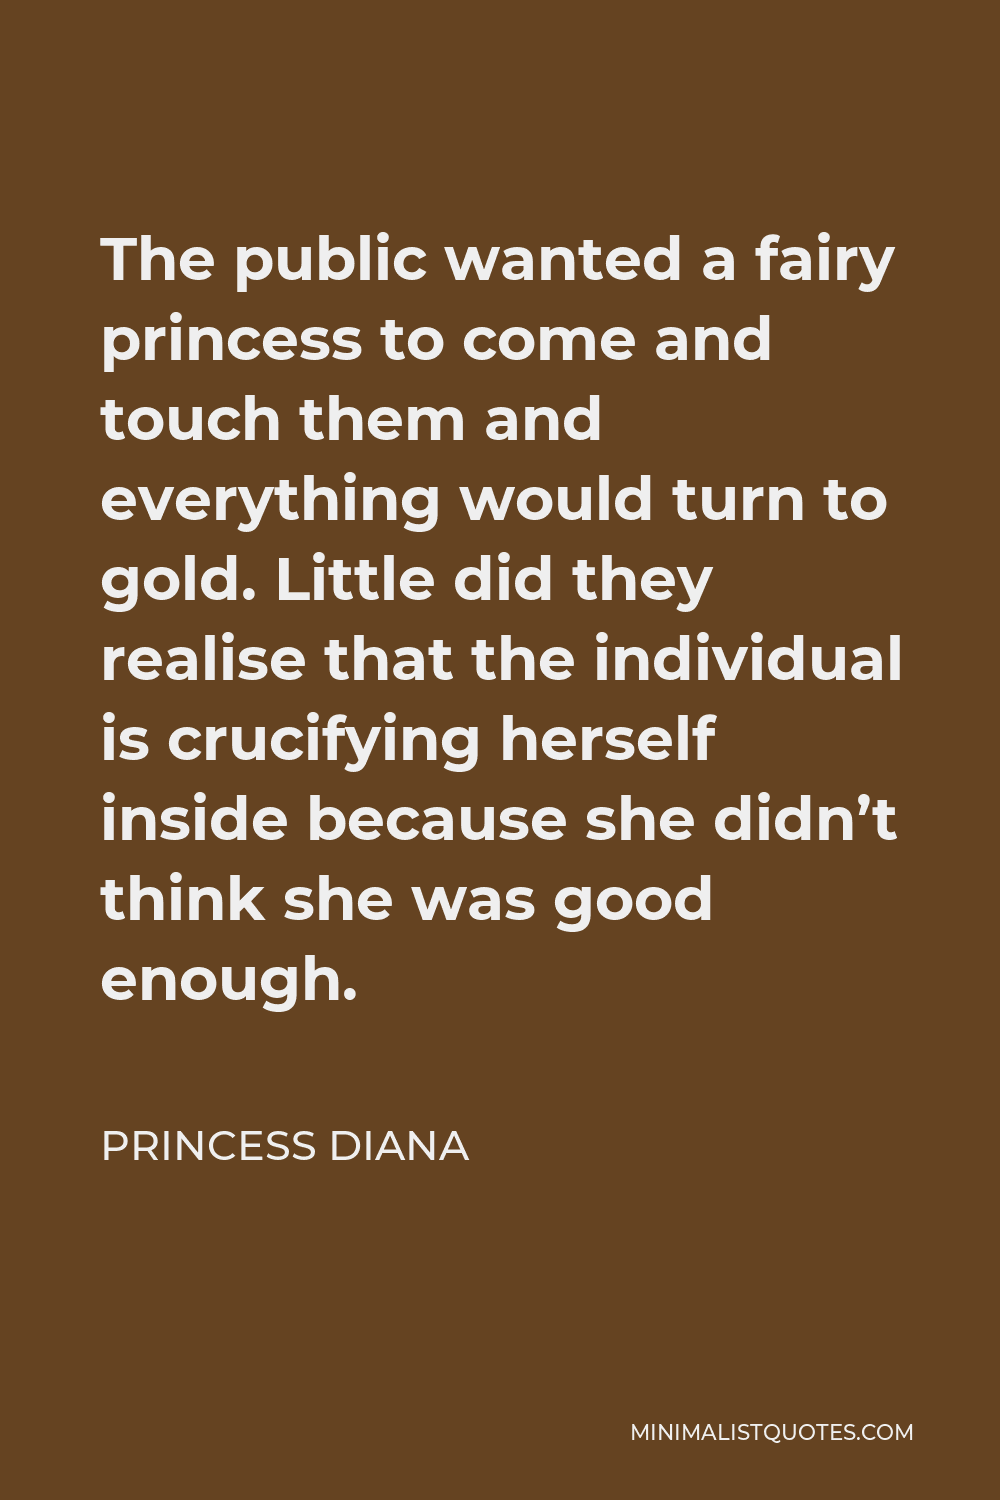 Princess Diana Quote - The public wanted a fairy princess to come and touch them and everything would turn to gold. Little did they realise that the individual is crucifying herself inside because she didn’t think she was good enough.